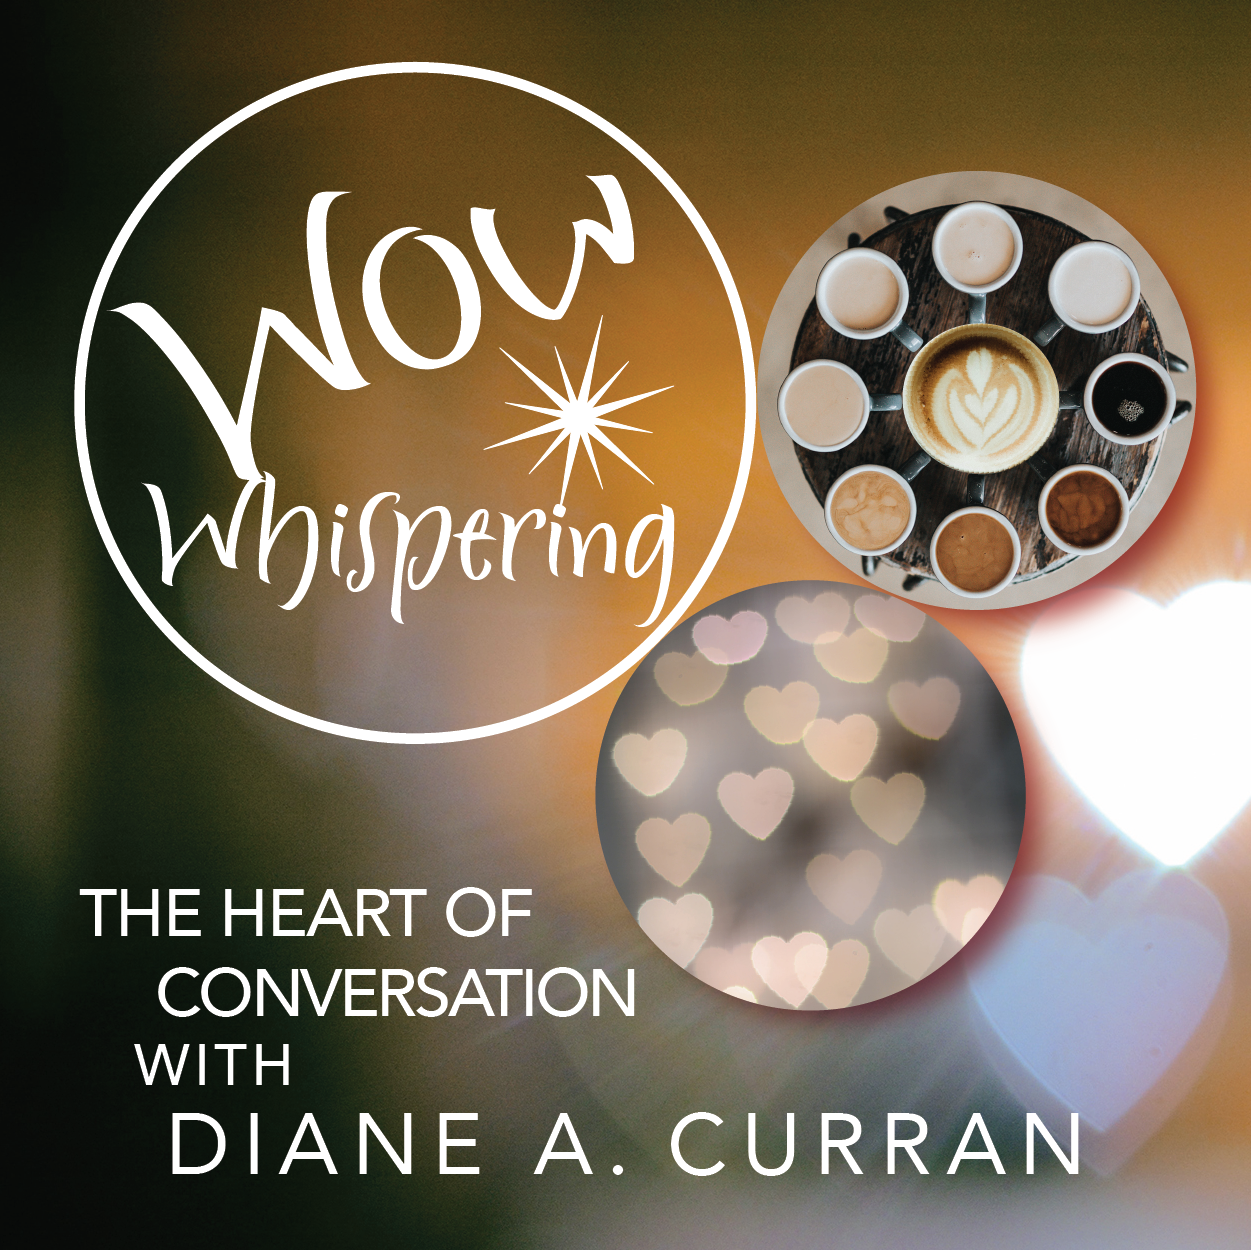 WowWhisperingLogo-TheHeartofConversation all white copy.png